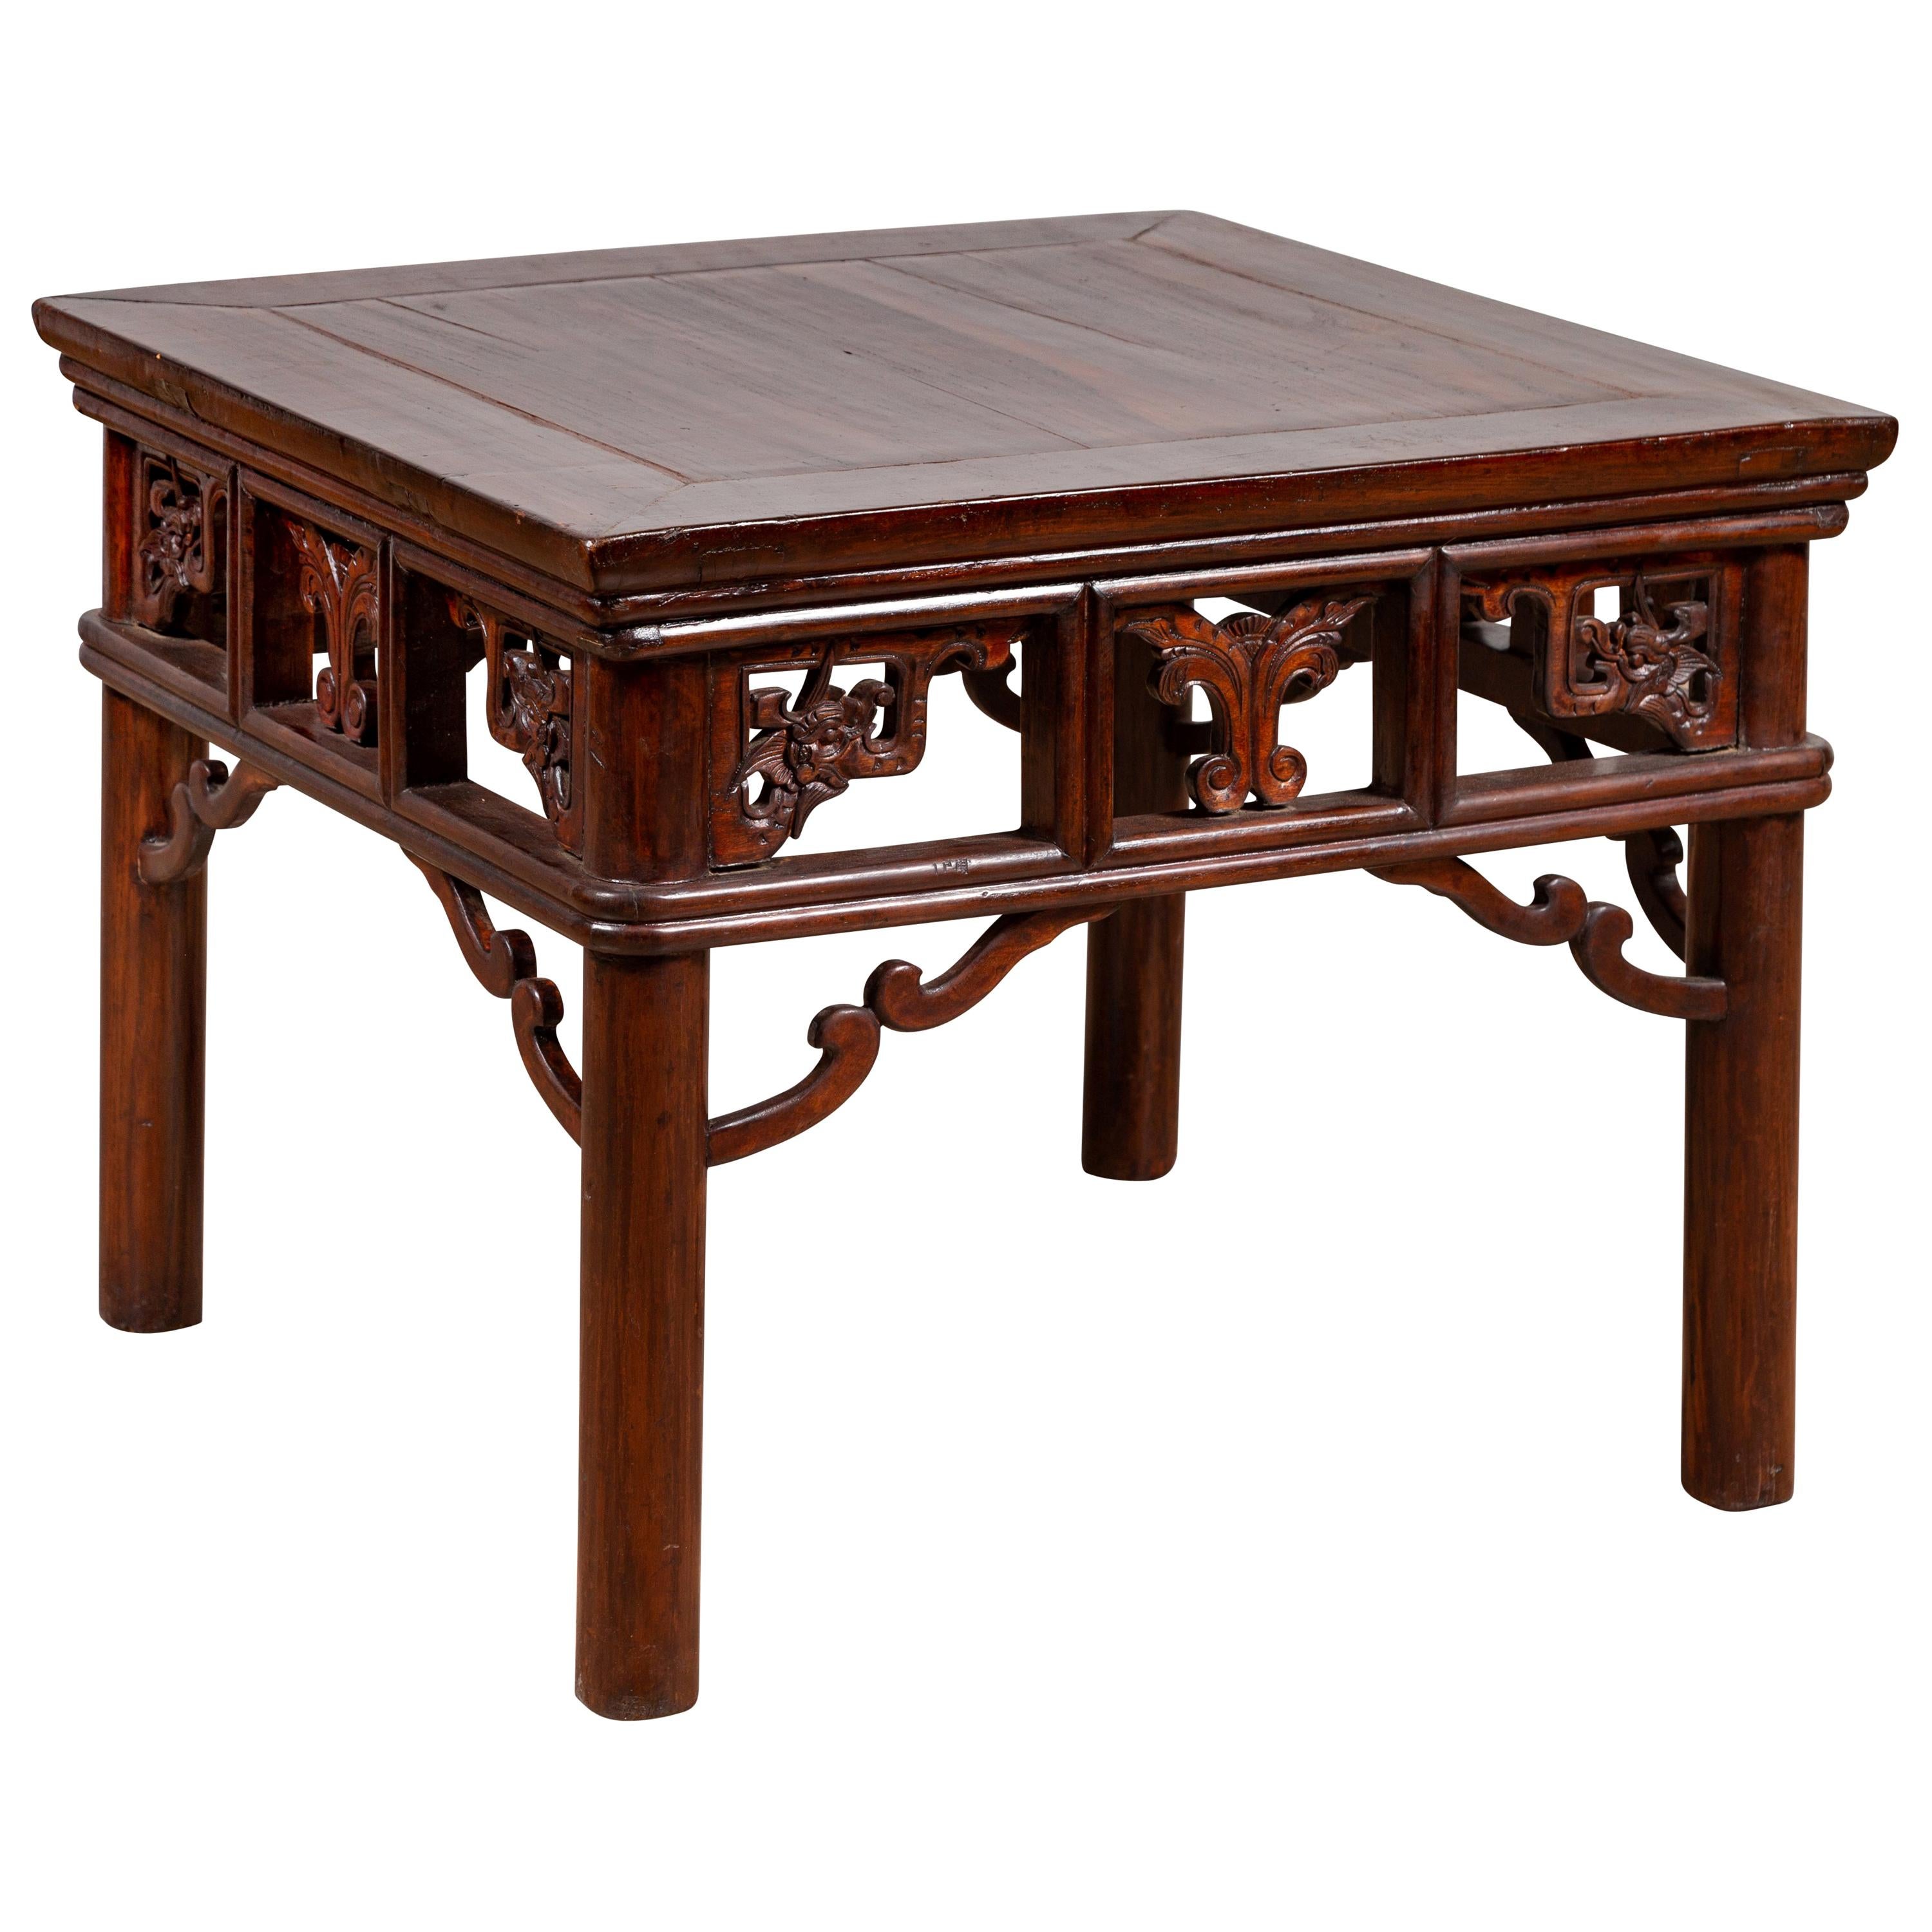 Chinese Antique Side Table with Open Fretwork Design and Dark Wood Patina